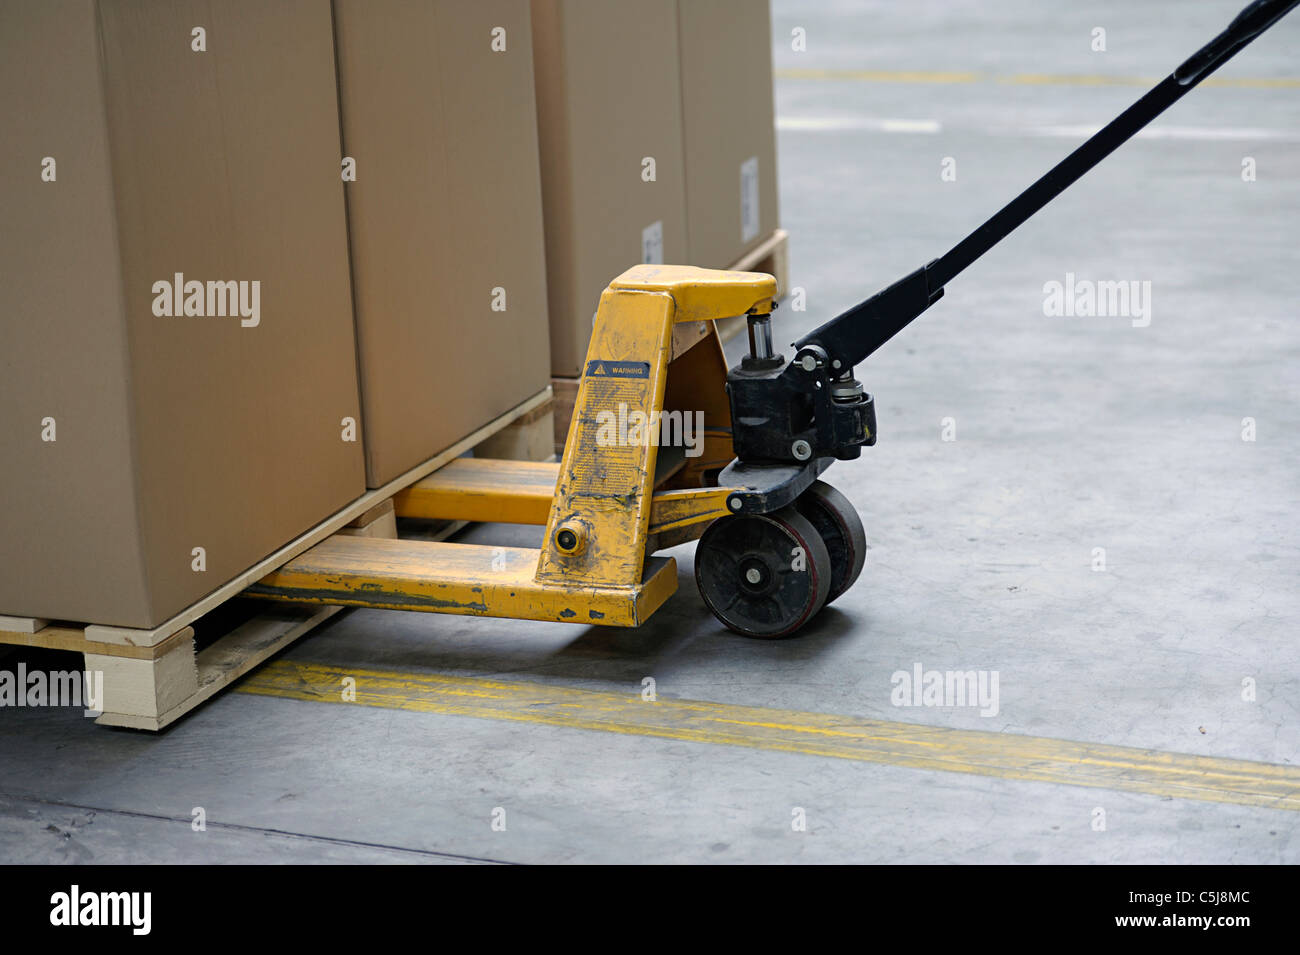 pallet truck with carton boxes Stock Photo